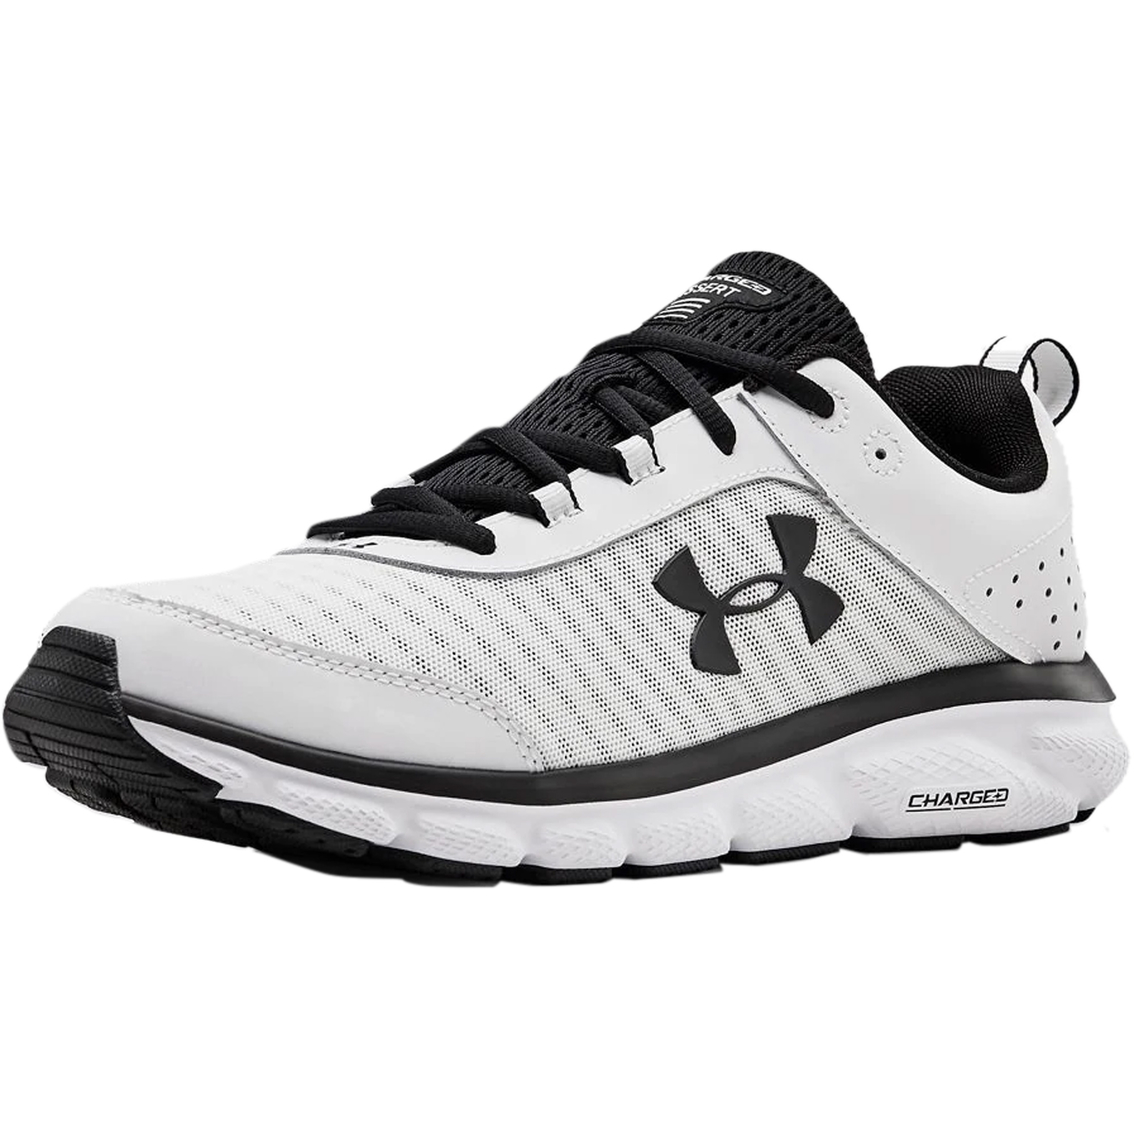 under armour neutral running shoes